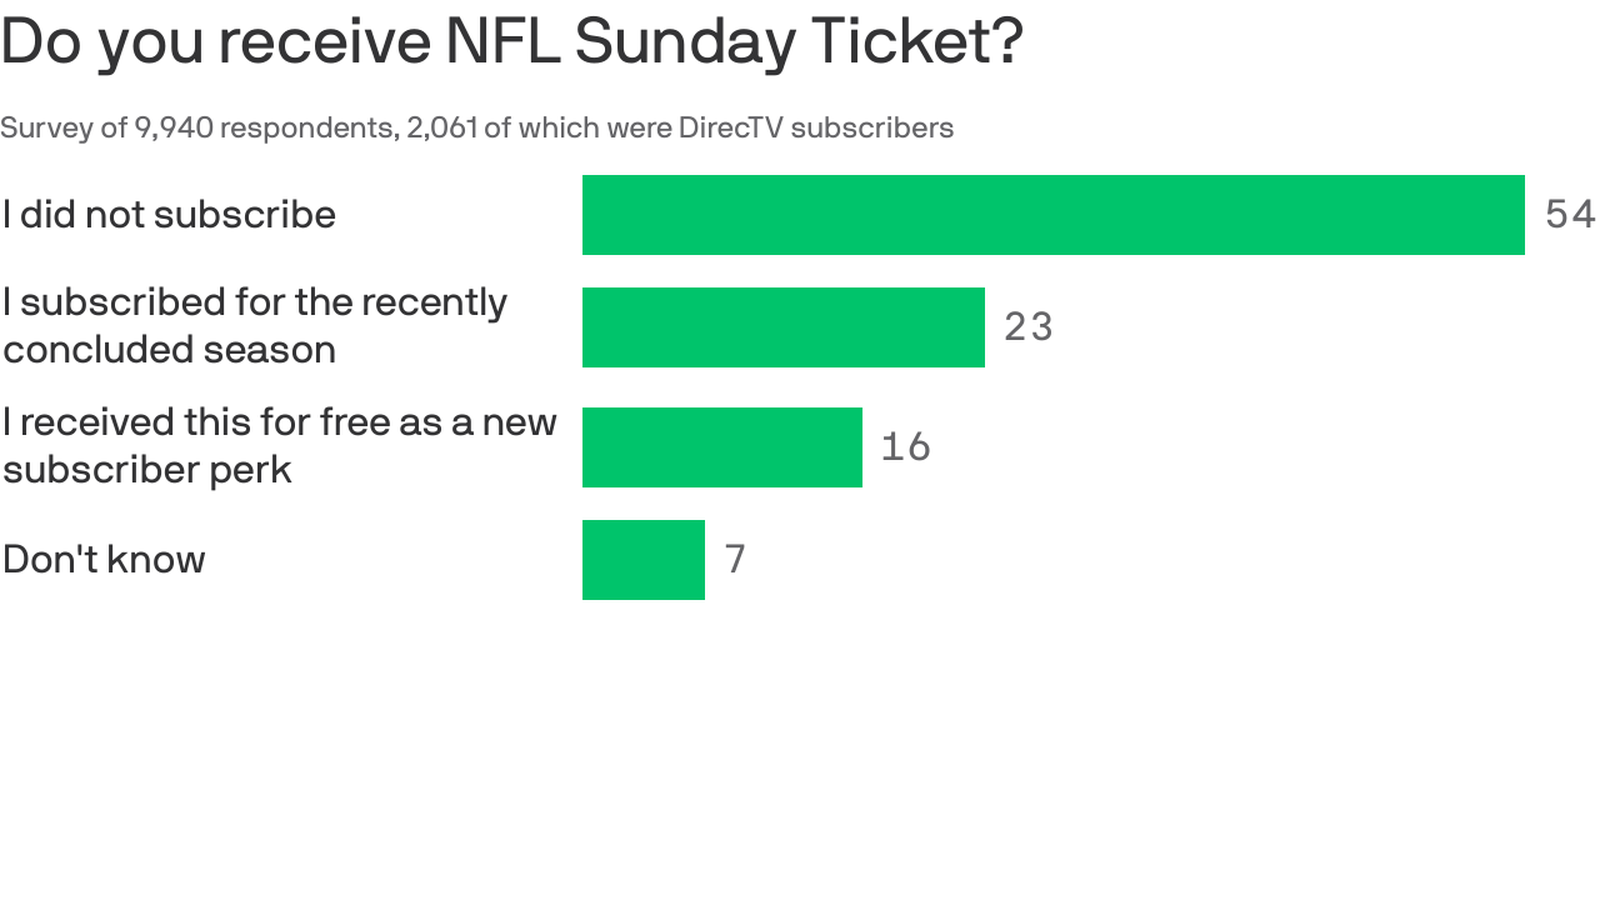 NFL Sunday Ticket on   beats DirecTV subscriber count